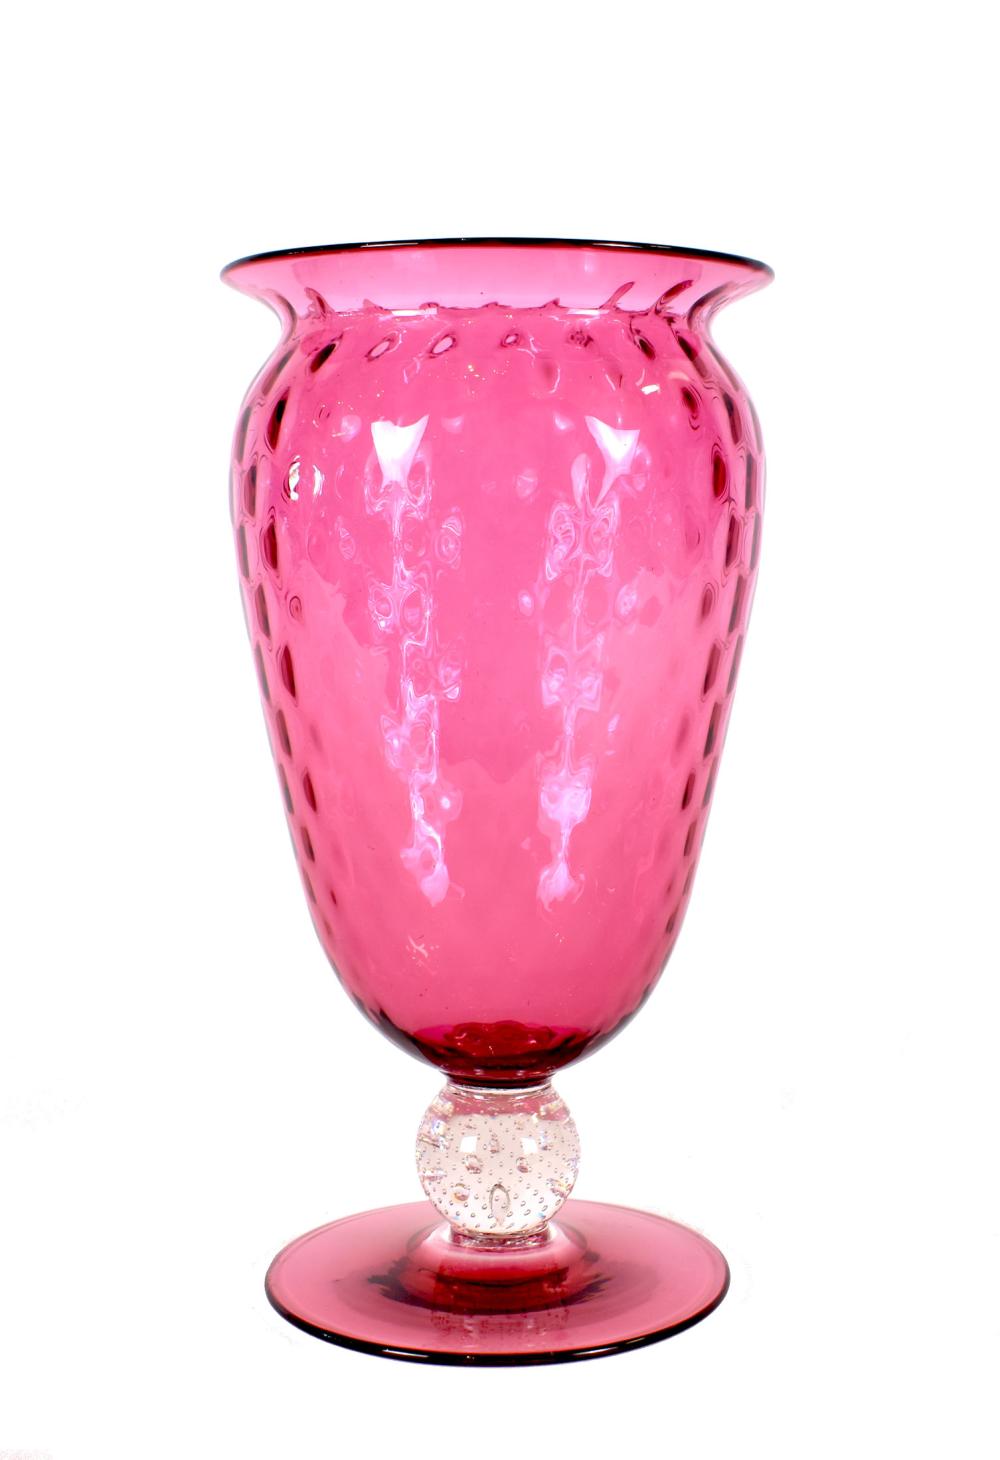 PAIRPOINT CRANBERRY GLASS FOOTED 3535ee